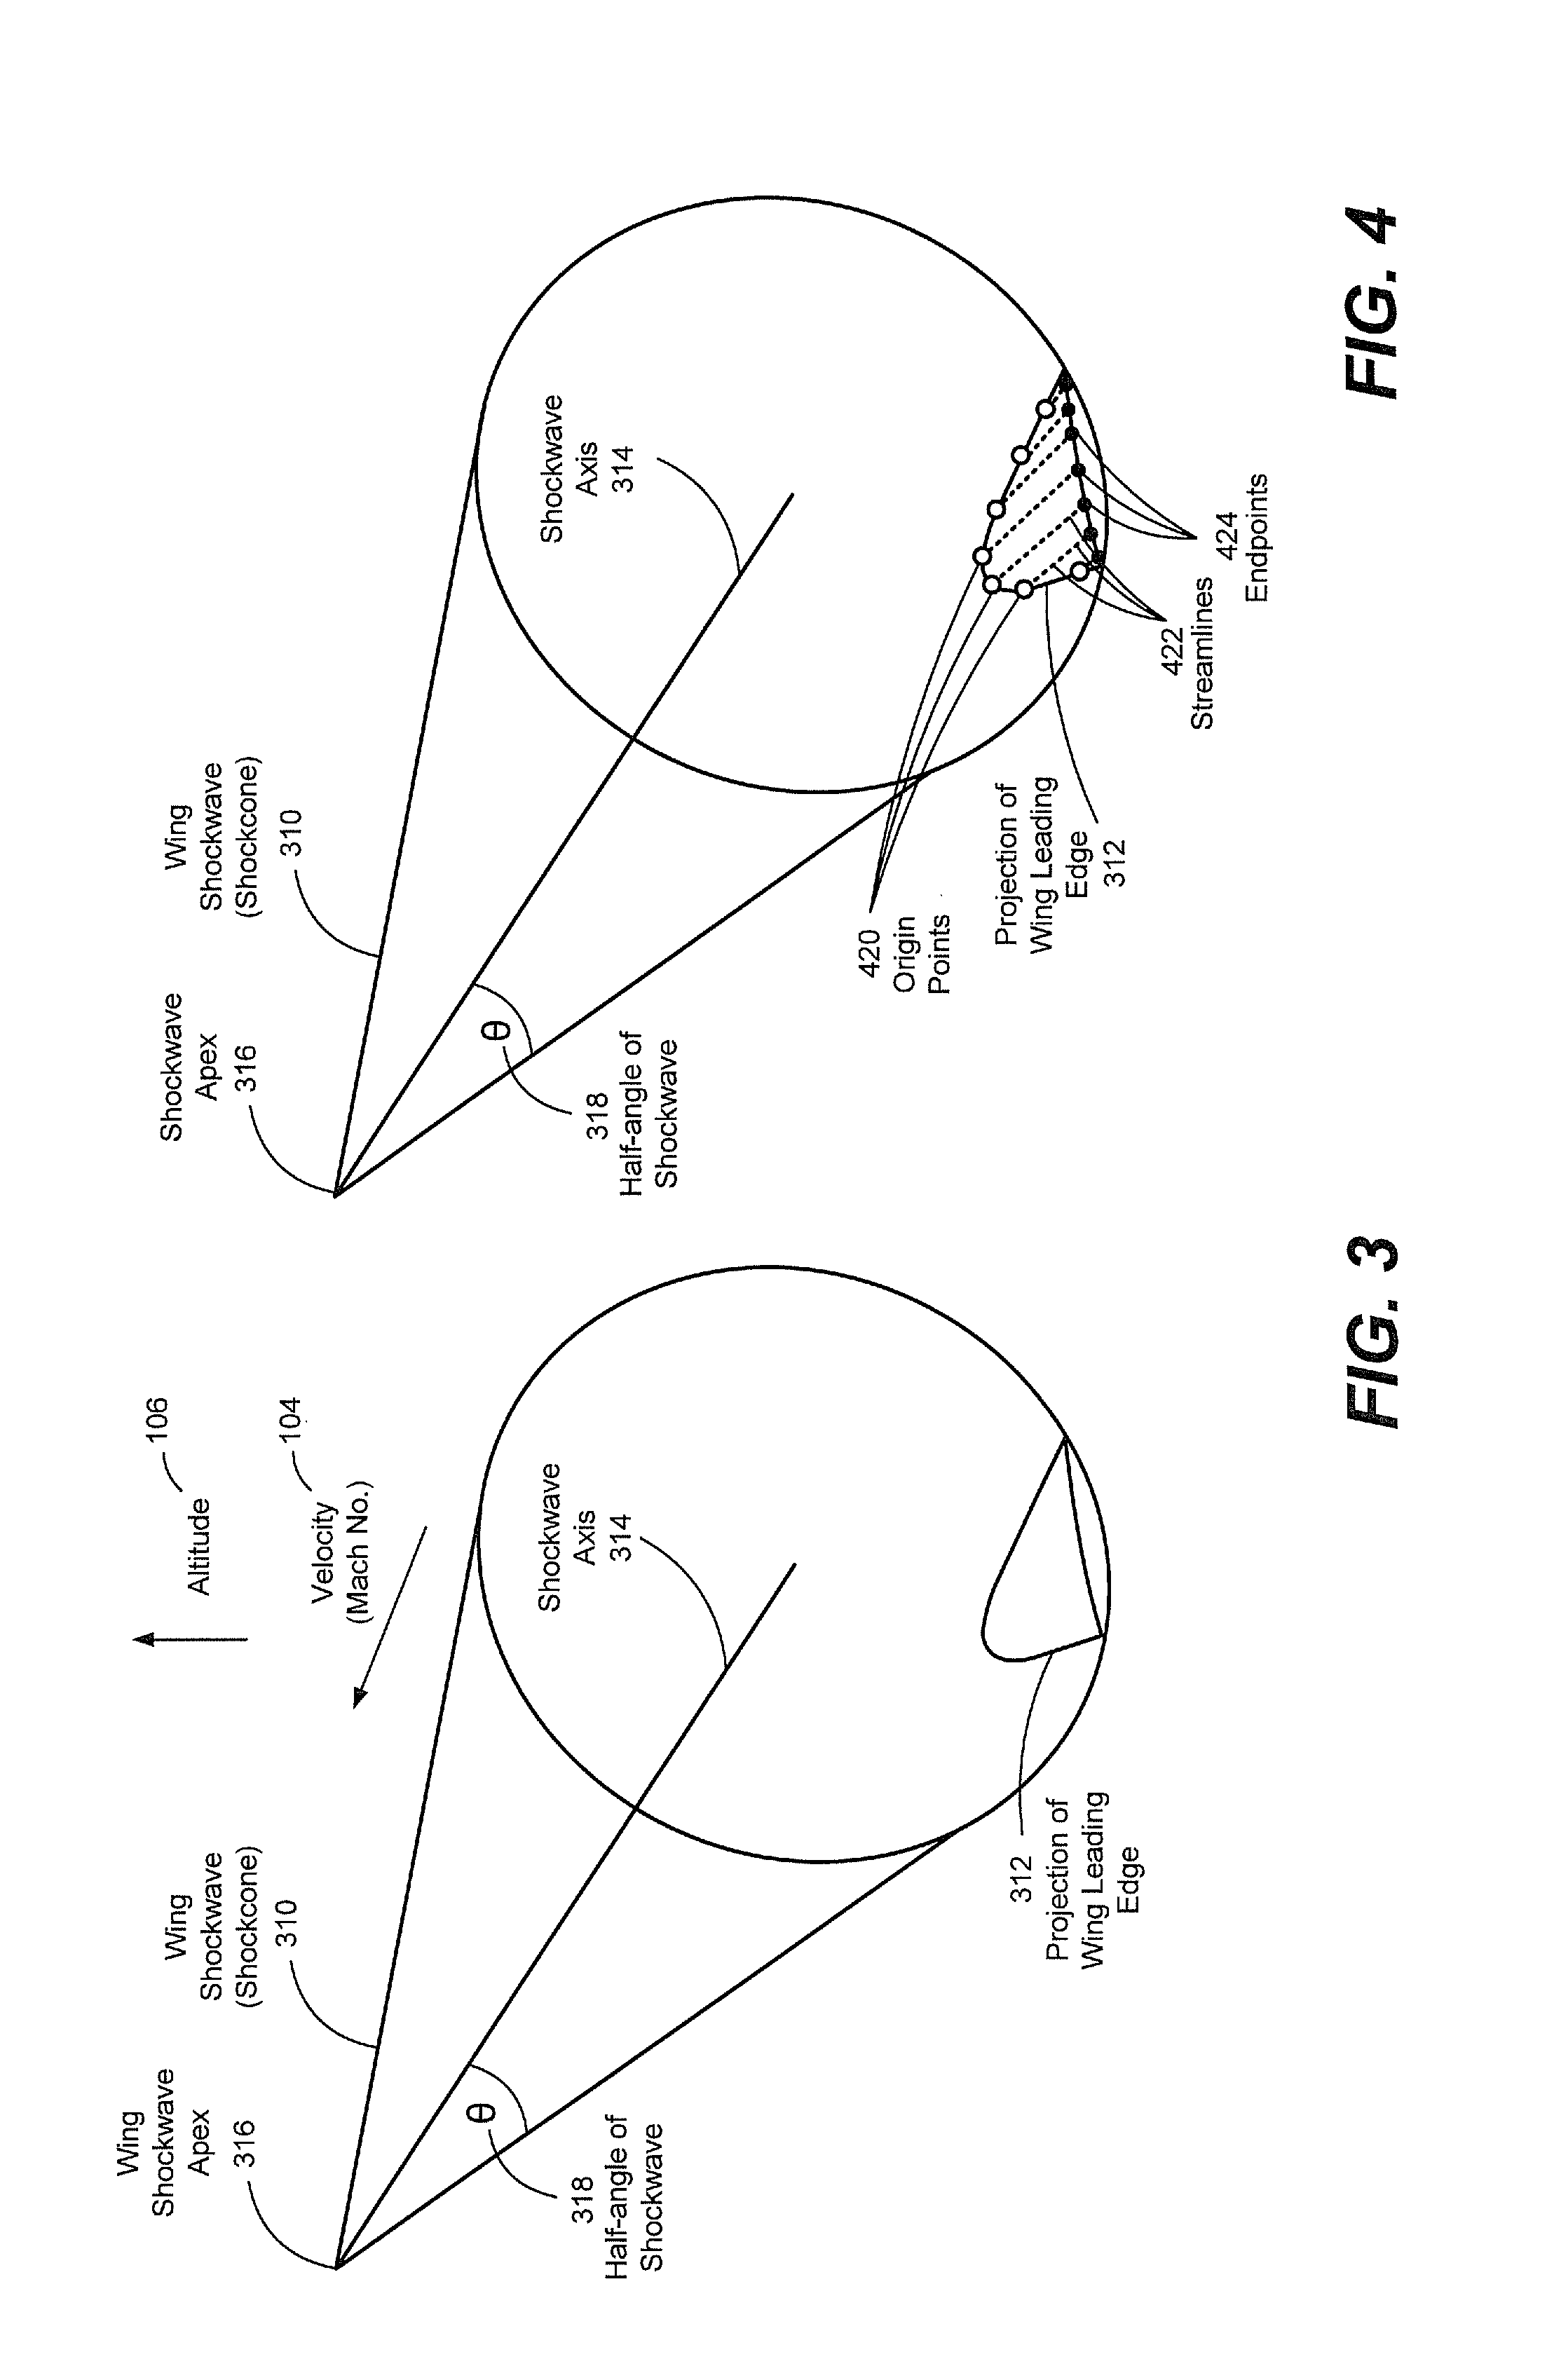 Integrated hypersonic inlet design